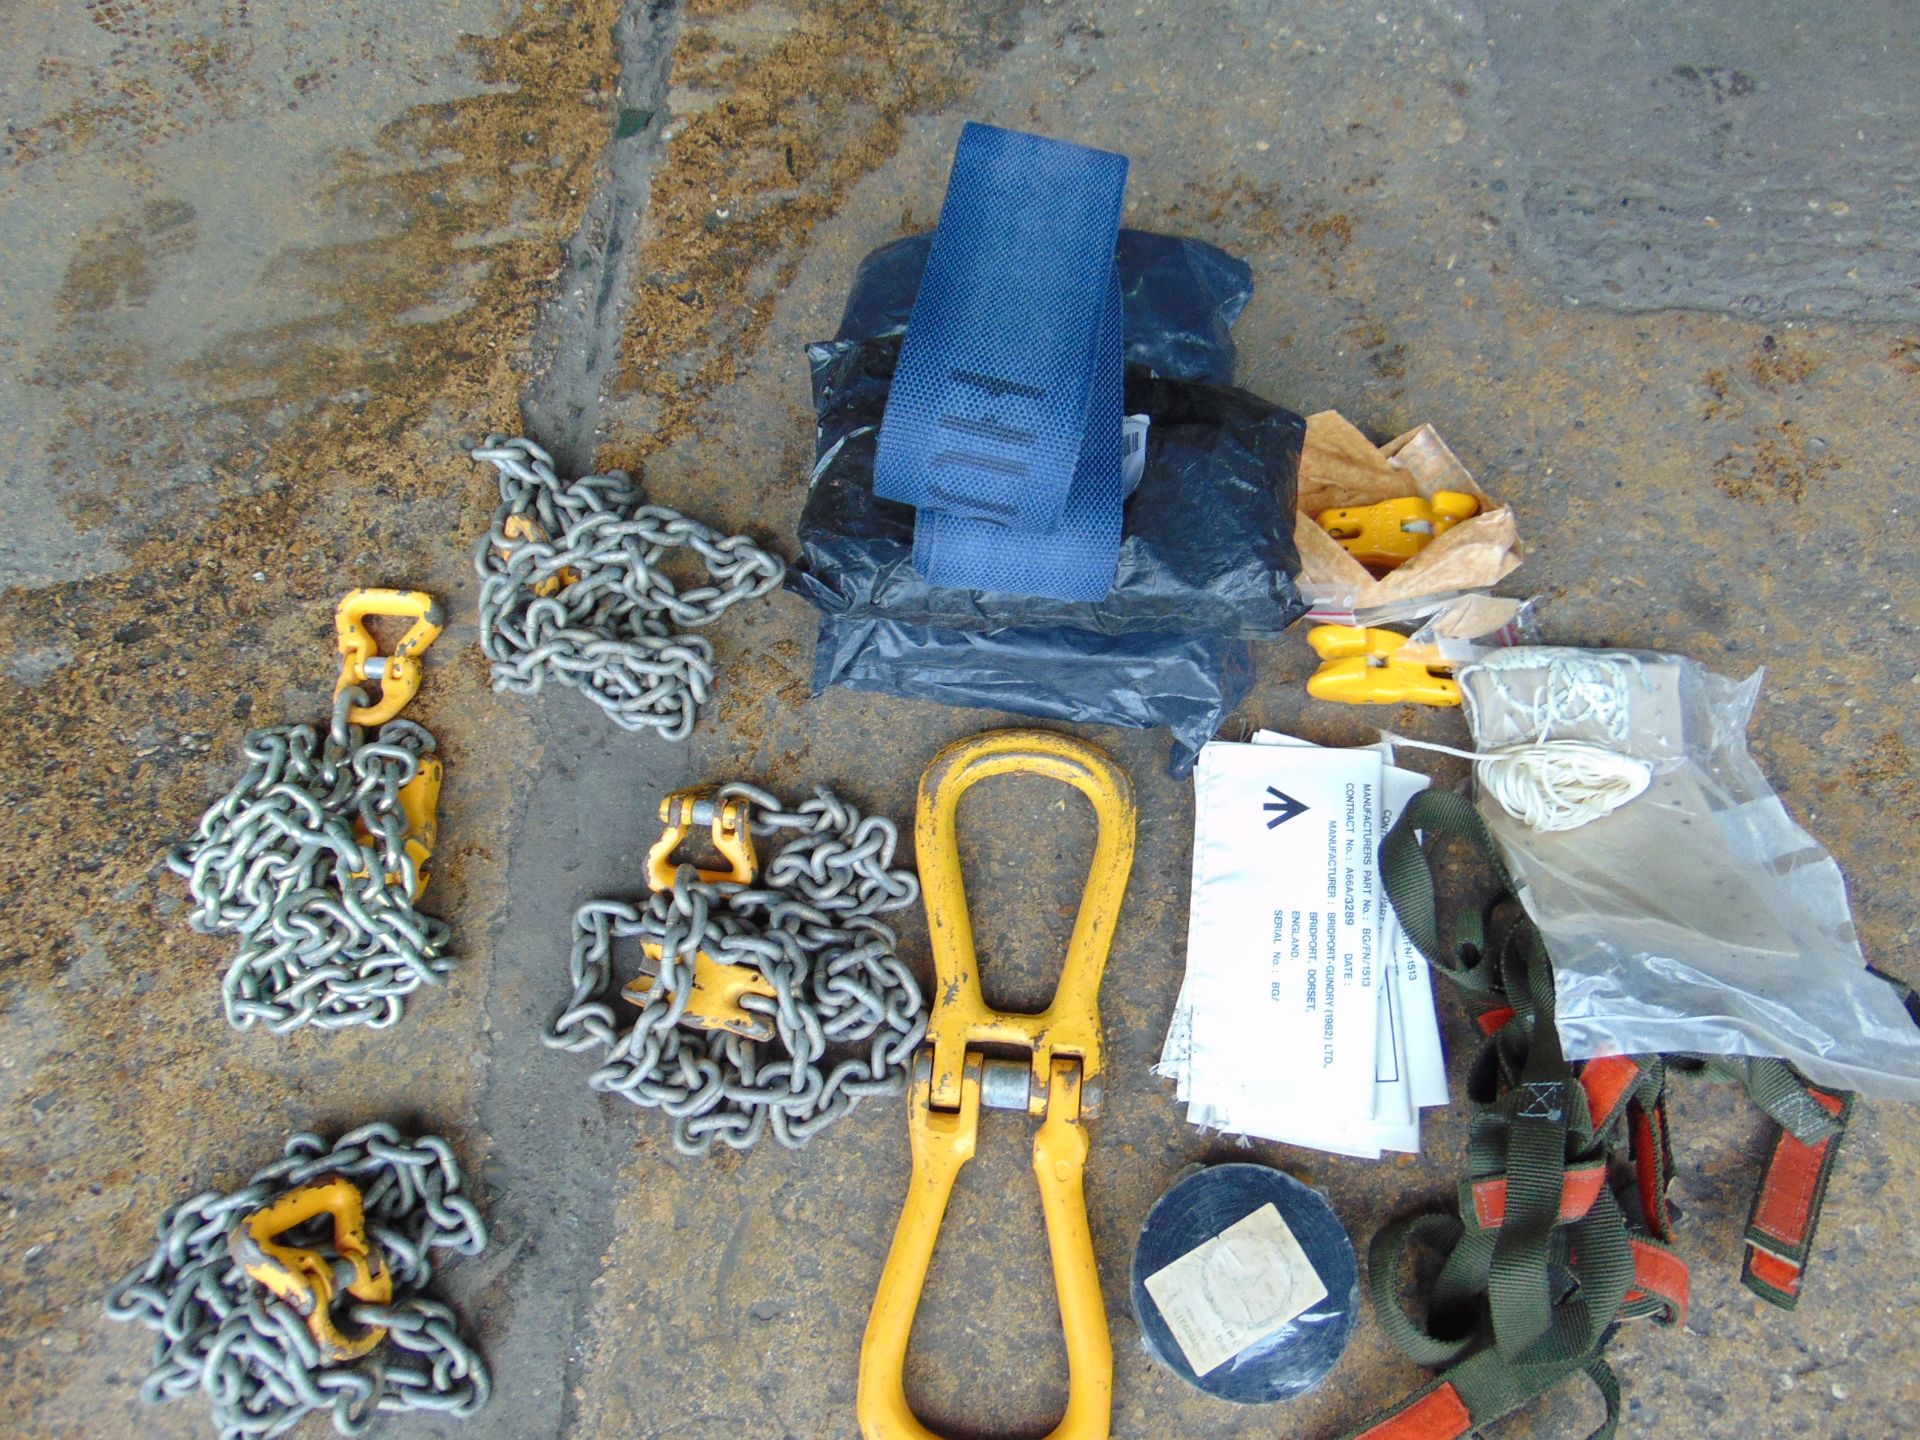 Lifting Kit c/w chains Straps etc Unissued - Image 4 of 4